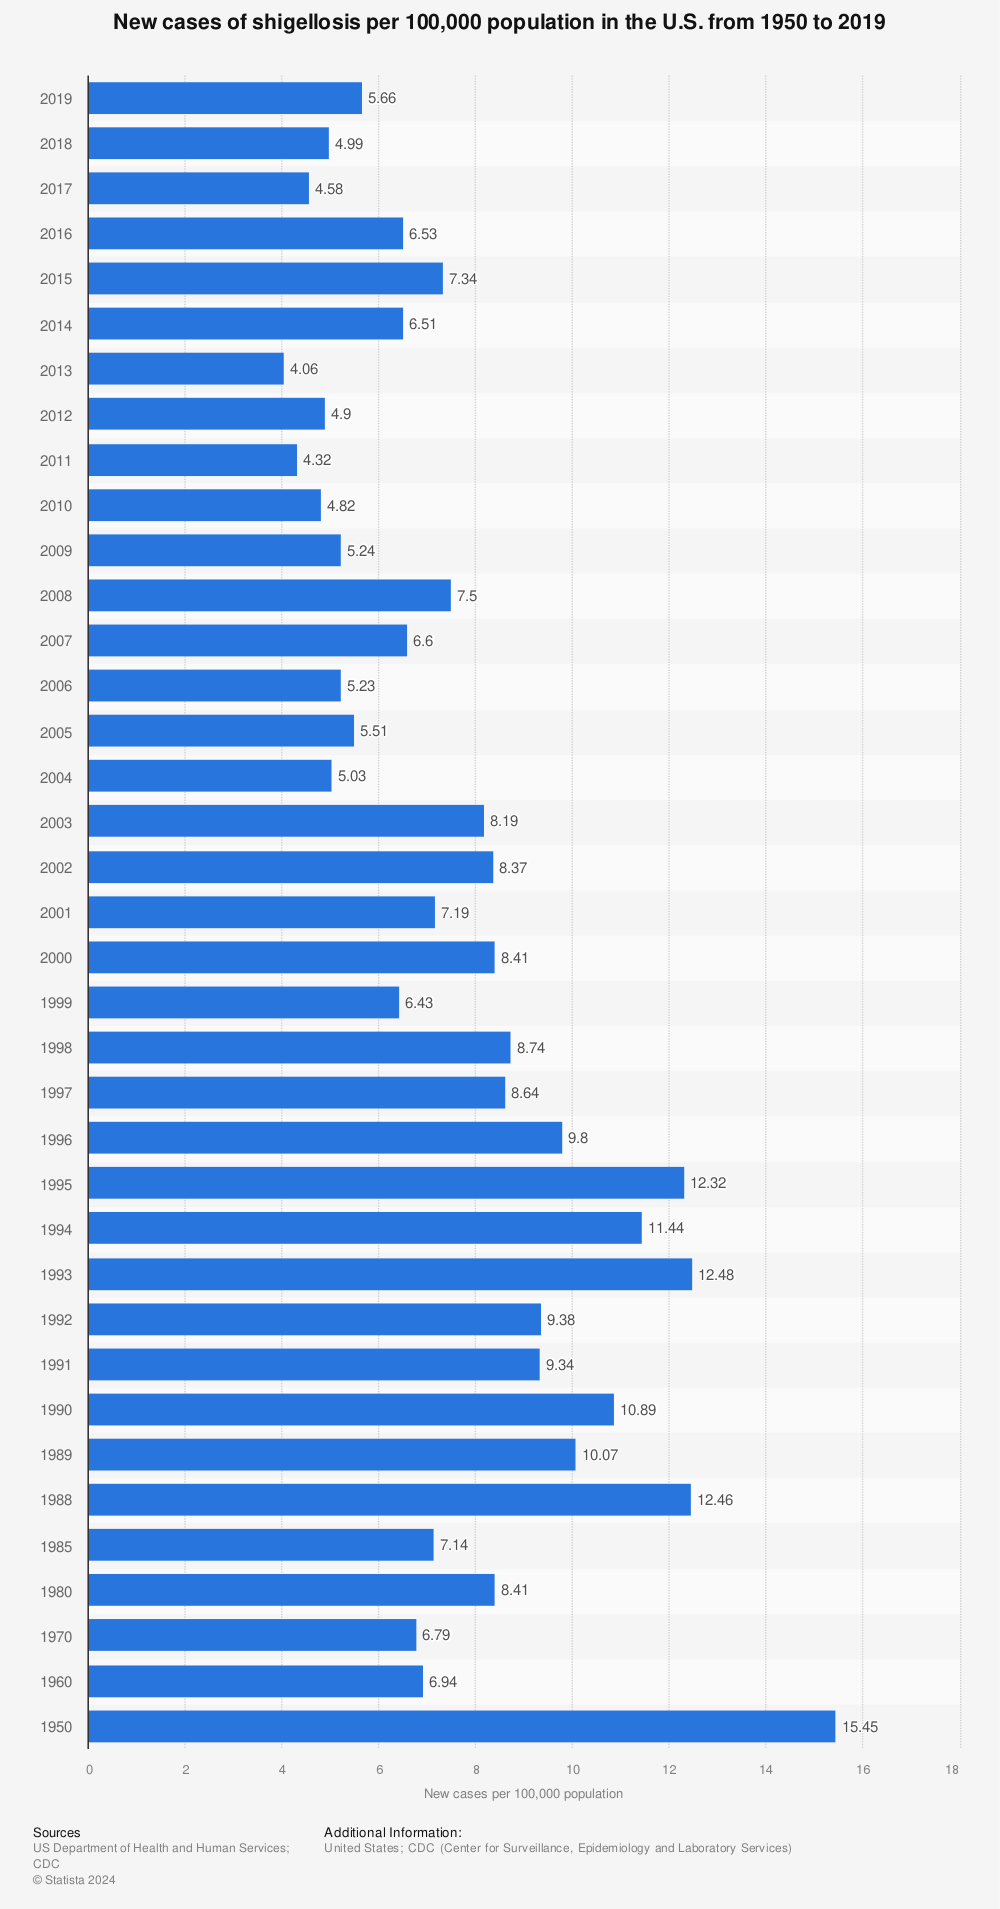 Statistic: New cases of shigellosis per 100,000 population in the U.S. from 1950 to 2019 | Statista